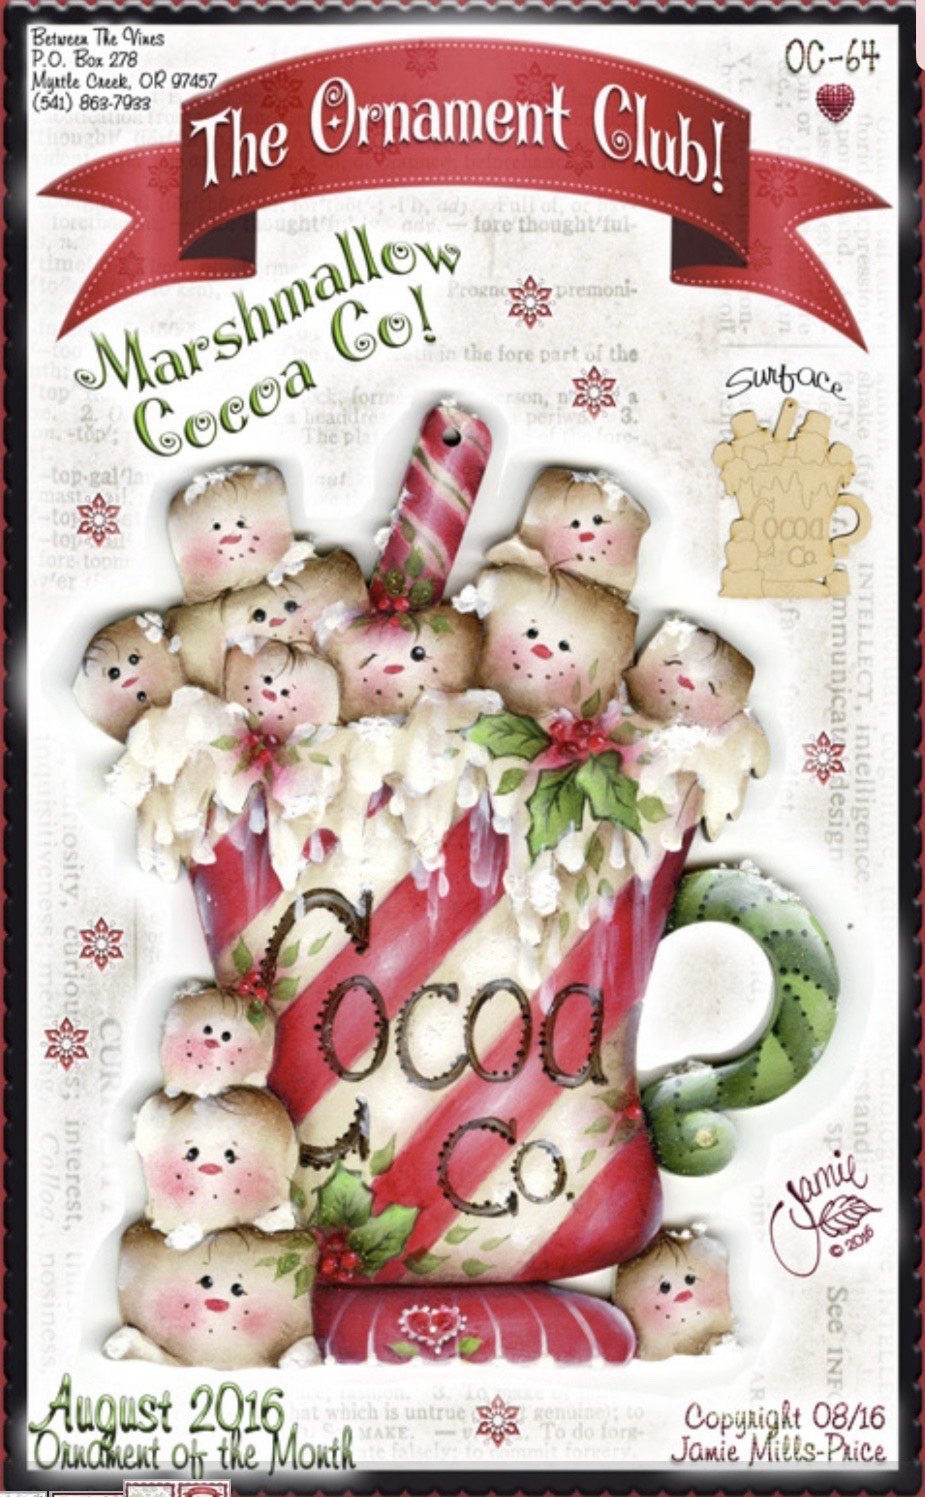 Marshmallow cocoa co - Out of the Wood